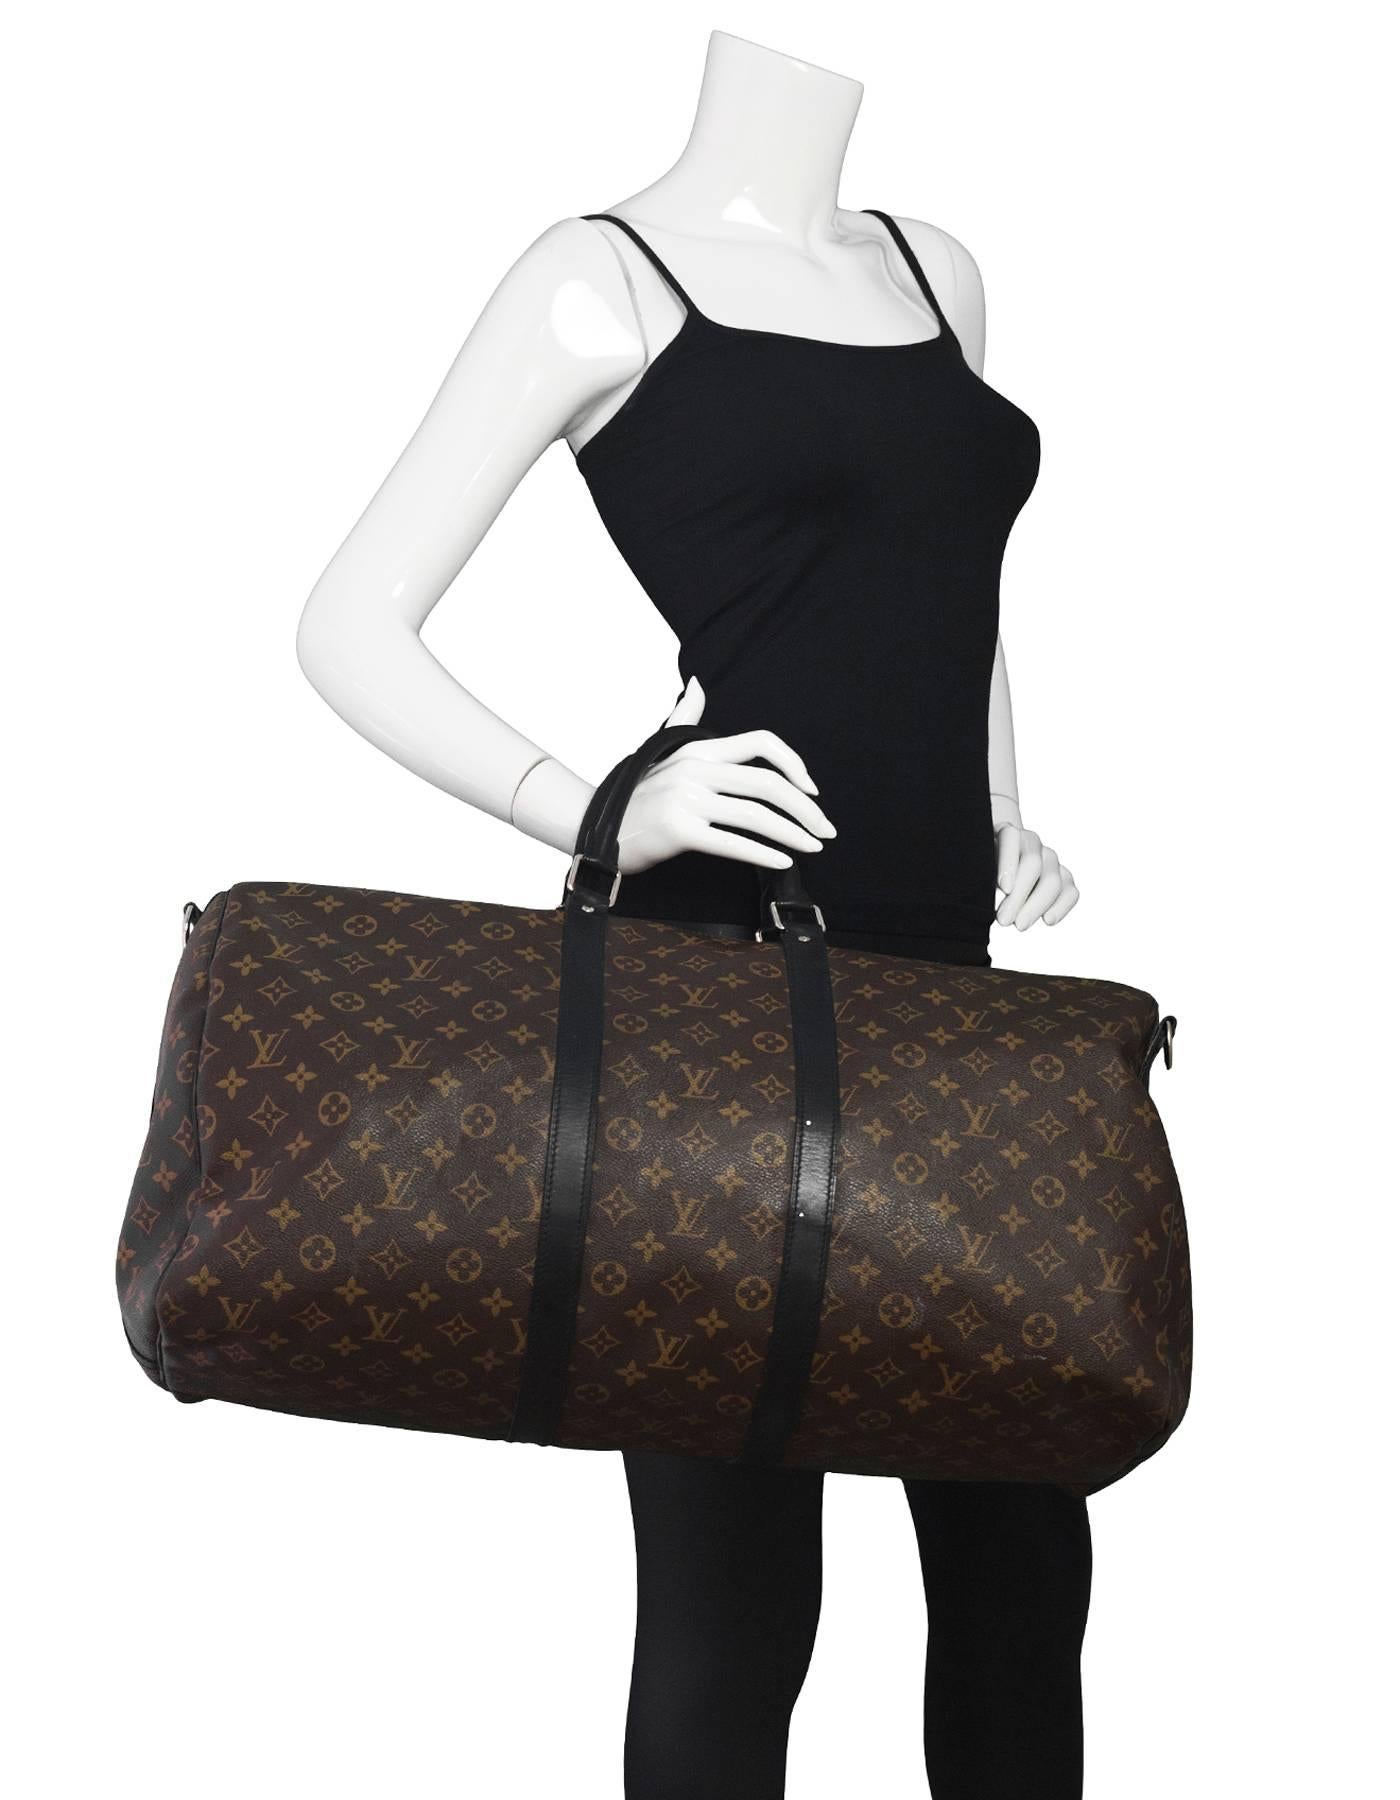 Louis Vuitton Monogram Macassar Keepall Bandouliere 55

Made In: France
Year of Production: 2012
Color: Brown and black
Hardware: Silvertone
Materials: Leather and coated canvas
Lining: Burgundy canvas
Closure/Opening: Double zip across top
Exterior